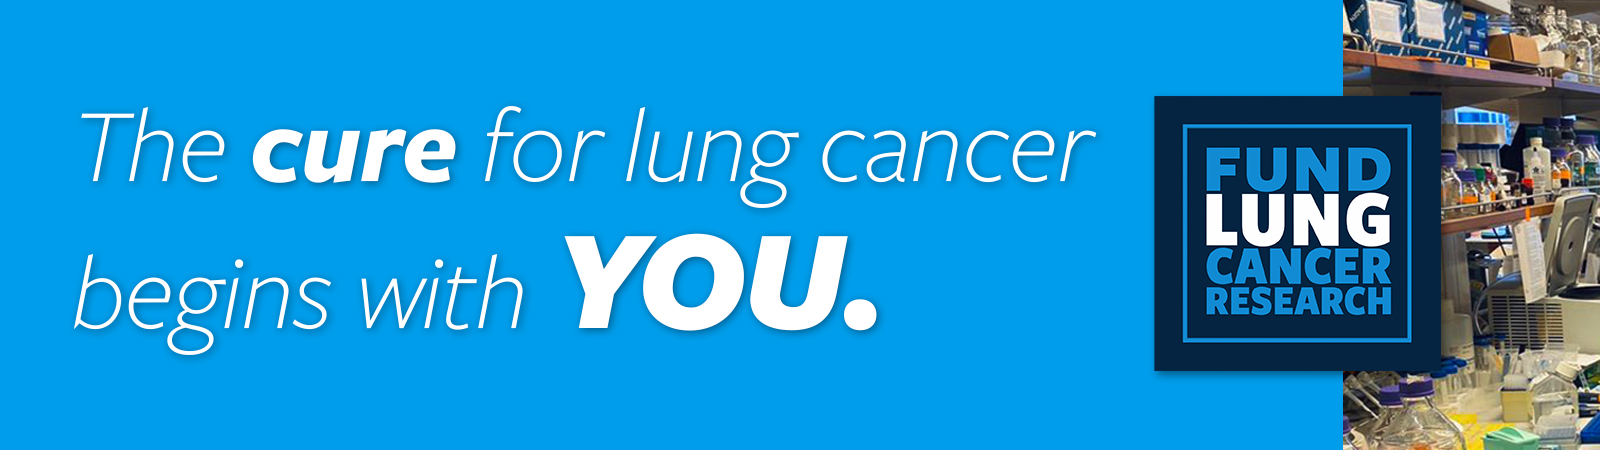 The cure for lung cancer begins with YOU.